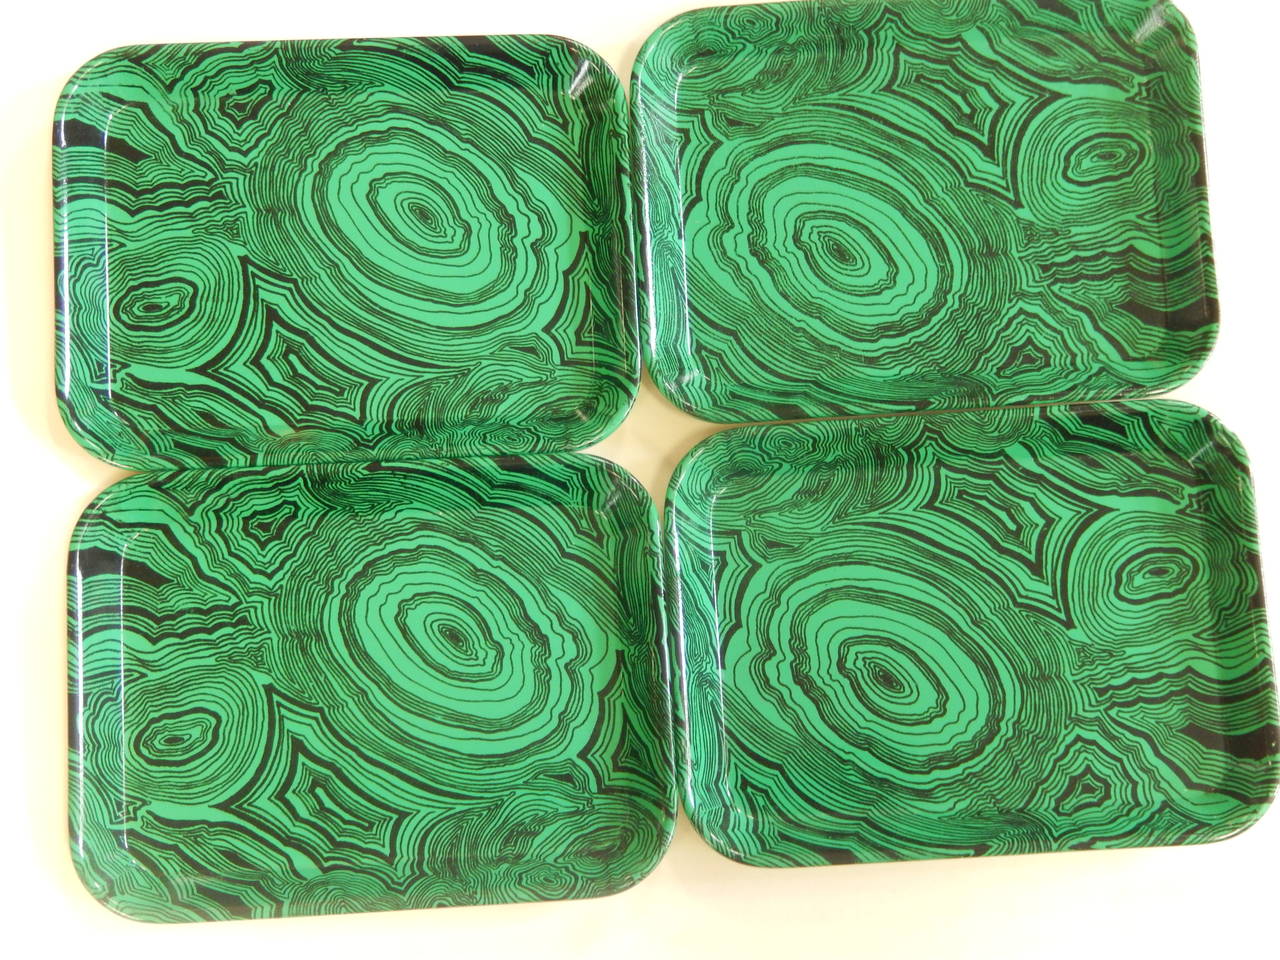 Lovely set of four signed Fornasetti hors d'oeuvres serving trays, dating to the 1960s. 

Rendered in cast and screen printed melamine, these trays are done in a pattern reminiscent of malachite. 

Measure 8